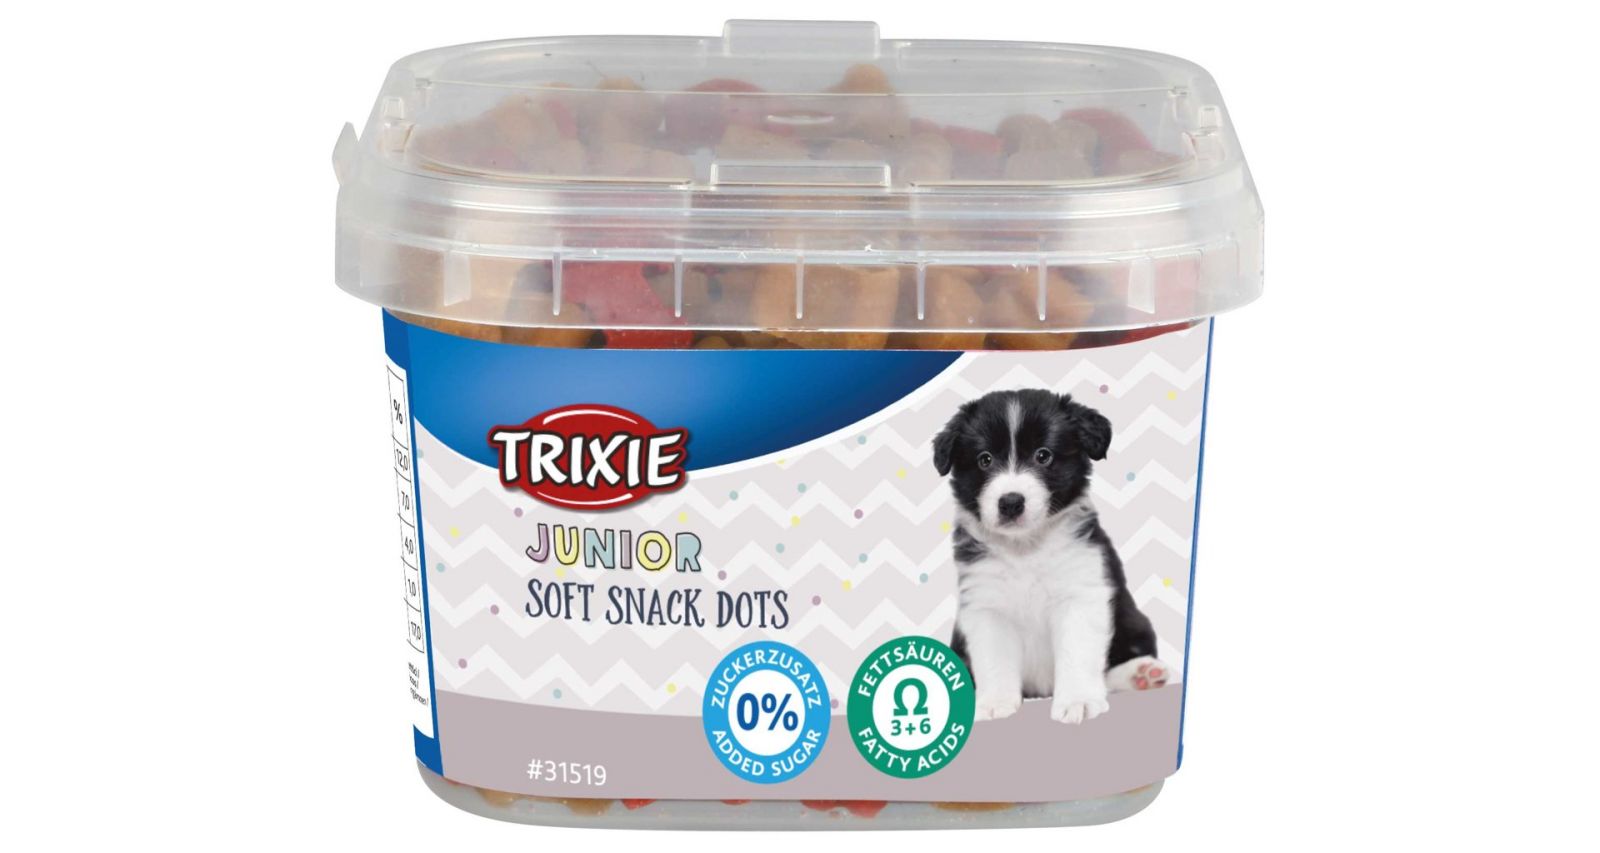 JUNIOR Soft Snack Dots s Omega 3 140g TRIXIE